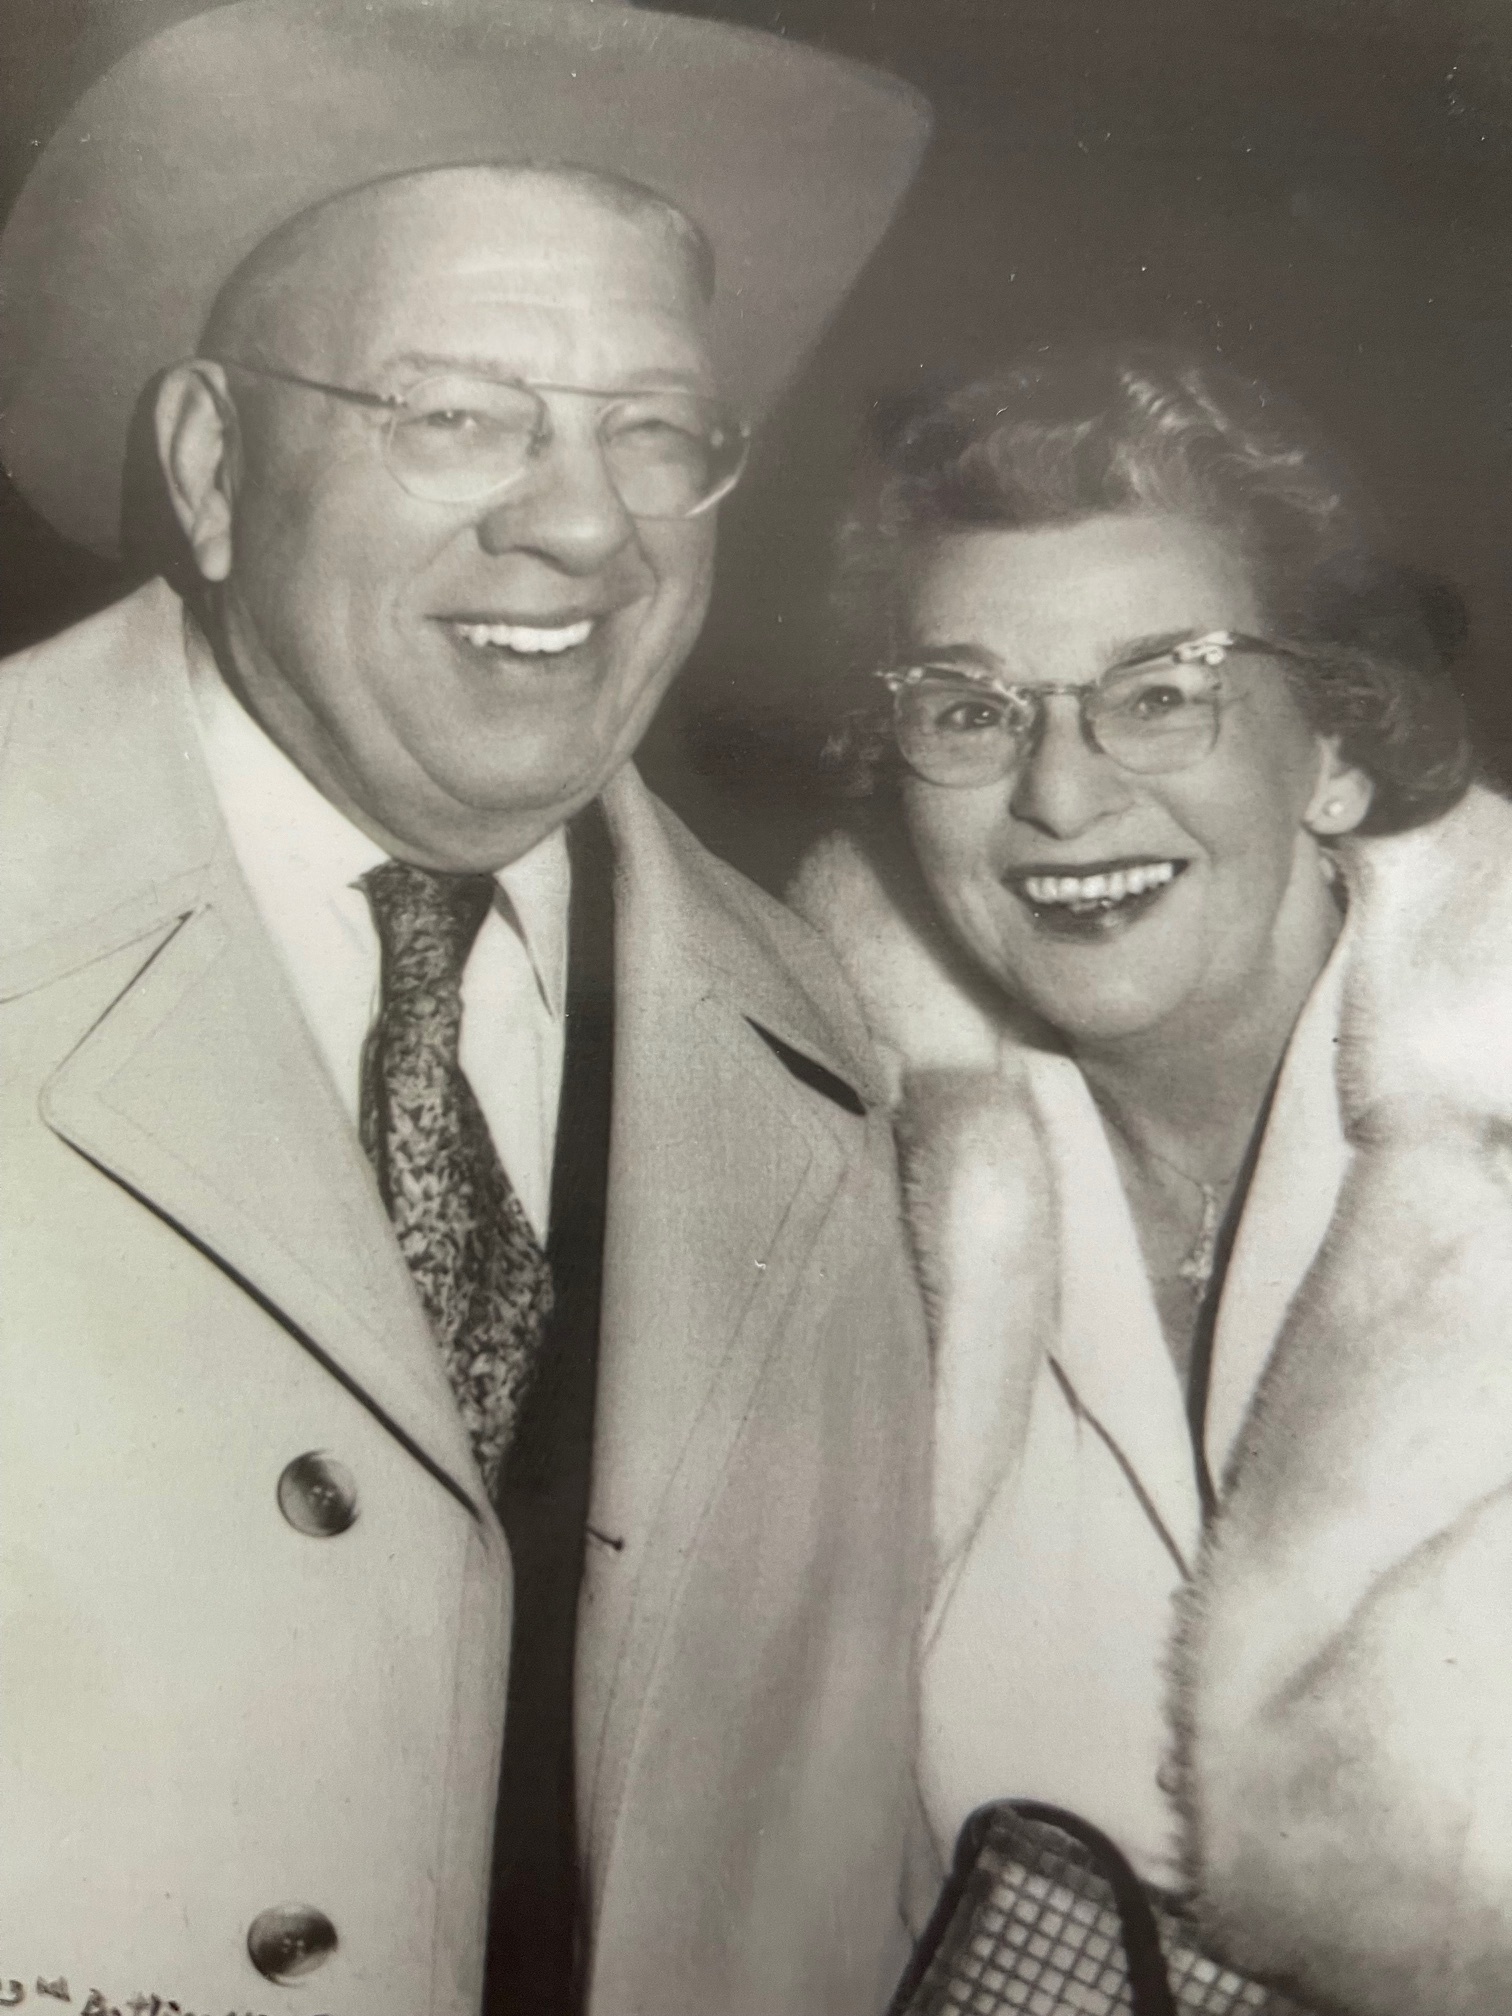 Anthony “Spag” Borgatti and his wife Olive were a spectacularly successful husband-and-wife team that ran the regionally famous “Spag’s” store in Shrewsbury.